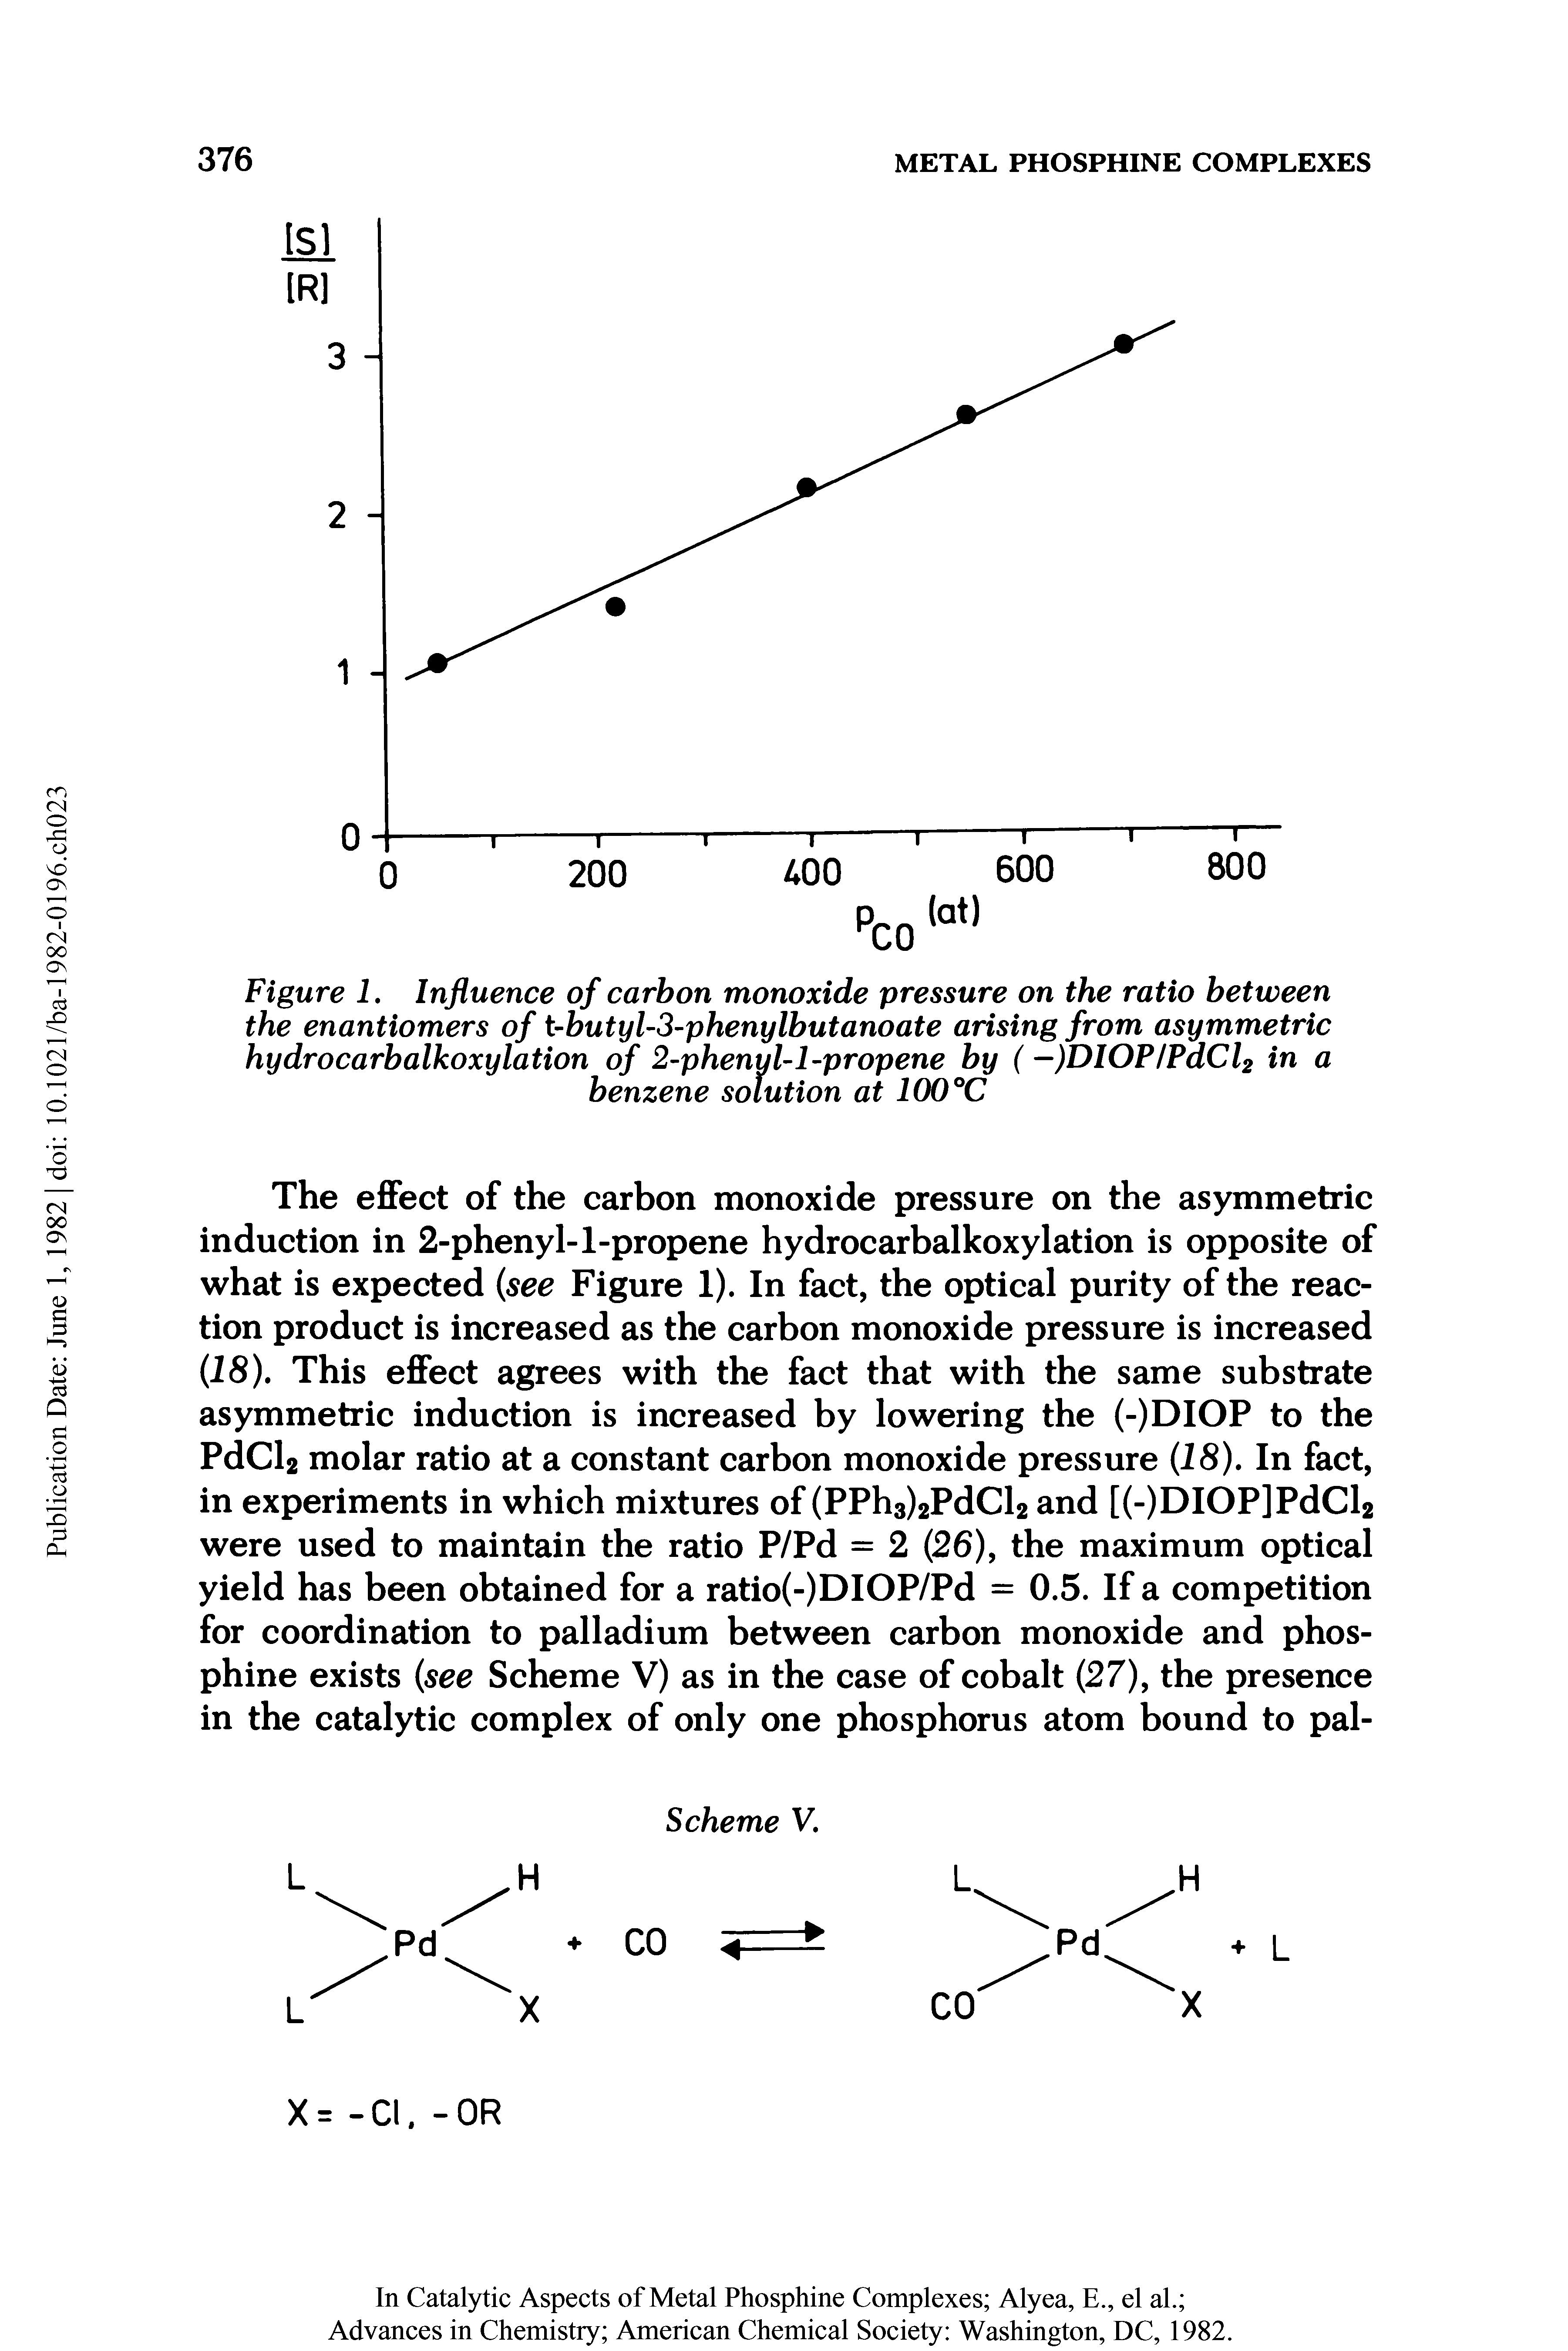 Figure 1. Influence of carbon monoxide pressure on the ratio between the enantiomers of t-butyl-3-phenylbutanoate arising from asymmetric hydrocarbalkoxylation of 2-phenul-l-propene by (—)DIOP/PaCl2 in a benzene solution at 100 °C...